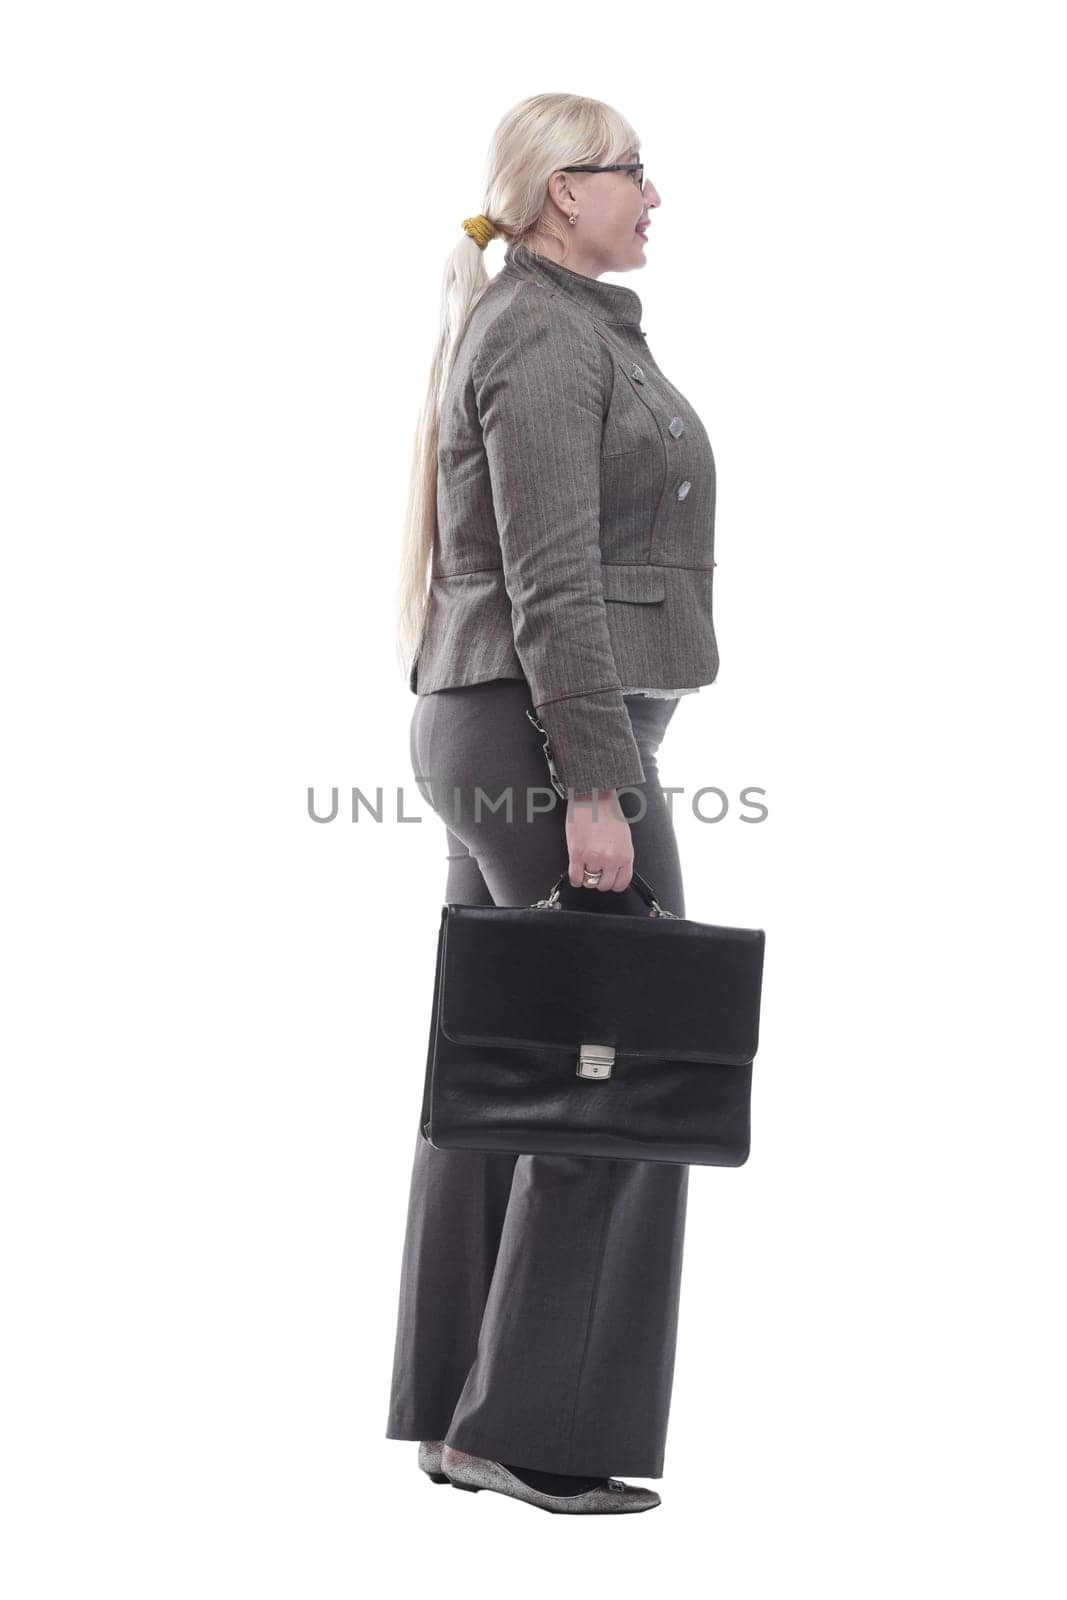 in full growth. friendly business woman with a leather briefcase. isolated on a white background